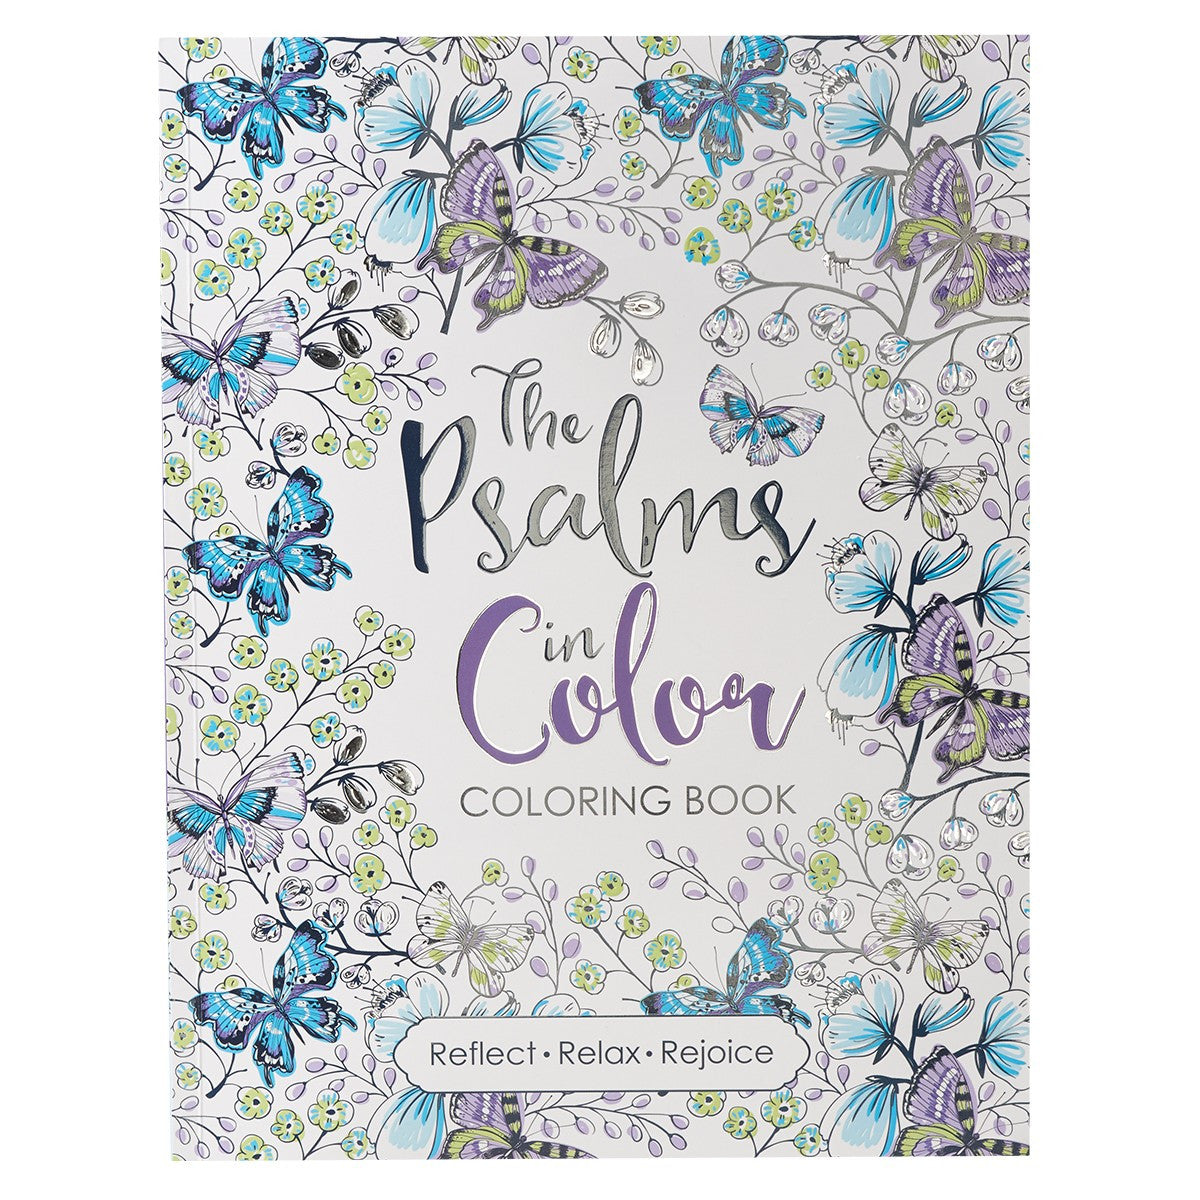 The Psalms in Color -Coloring Book